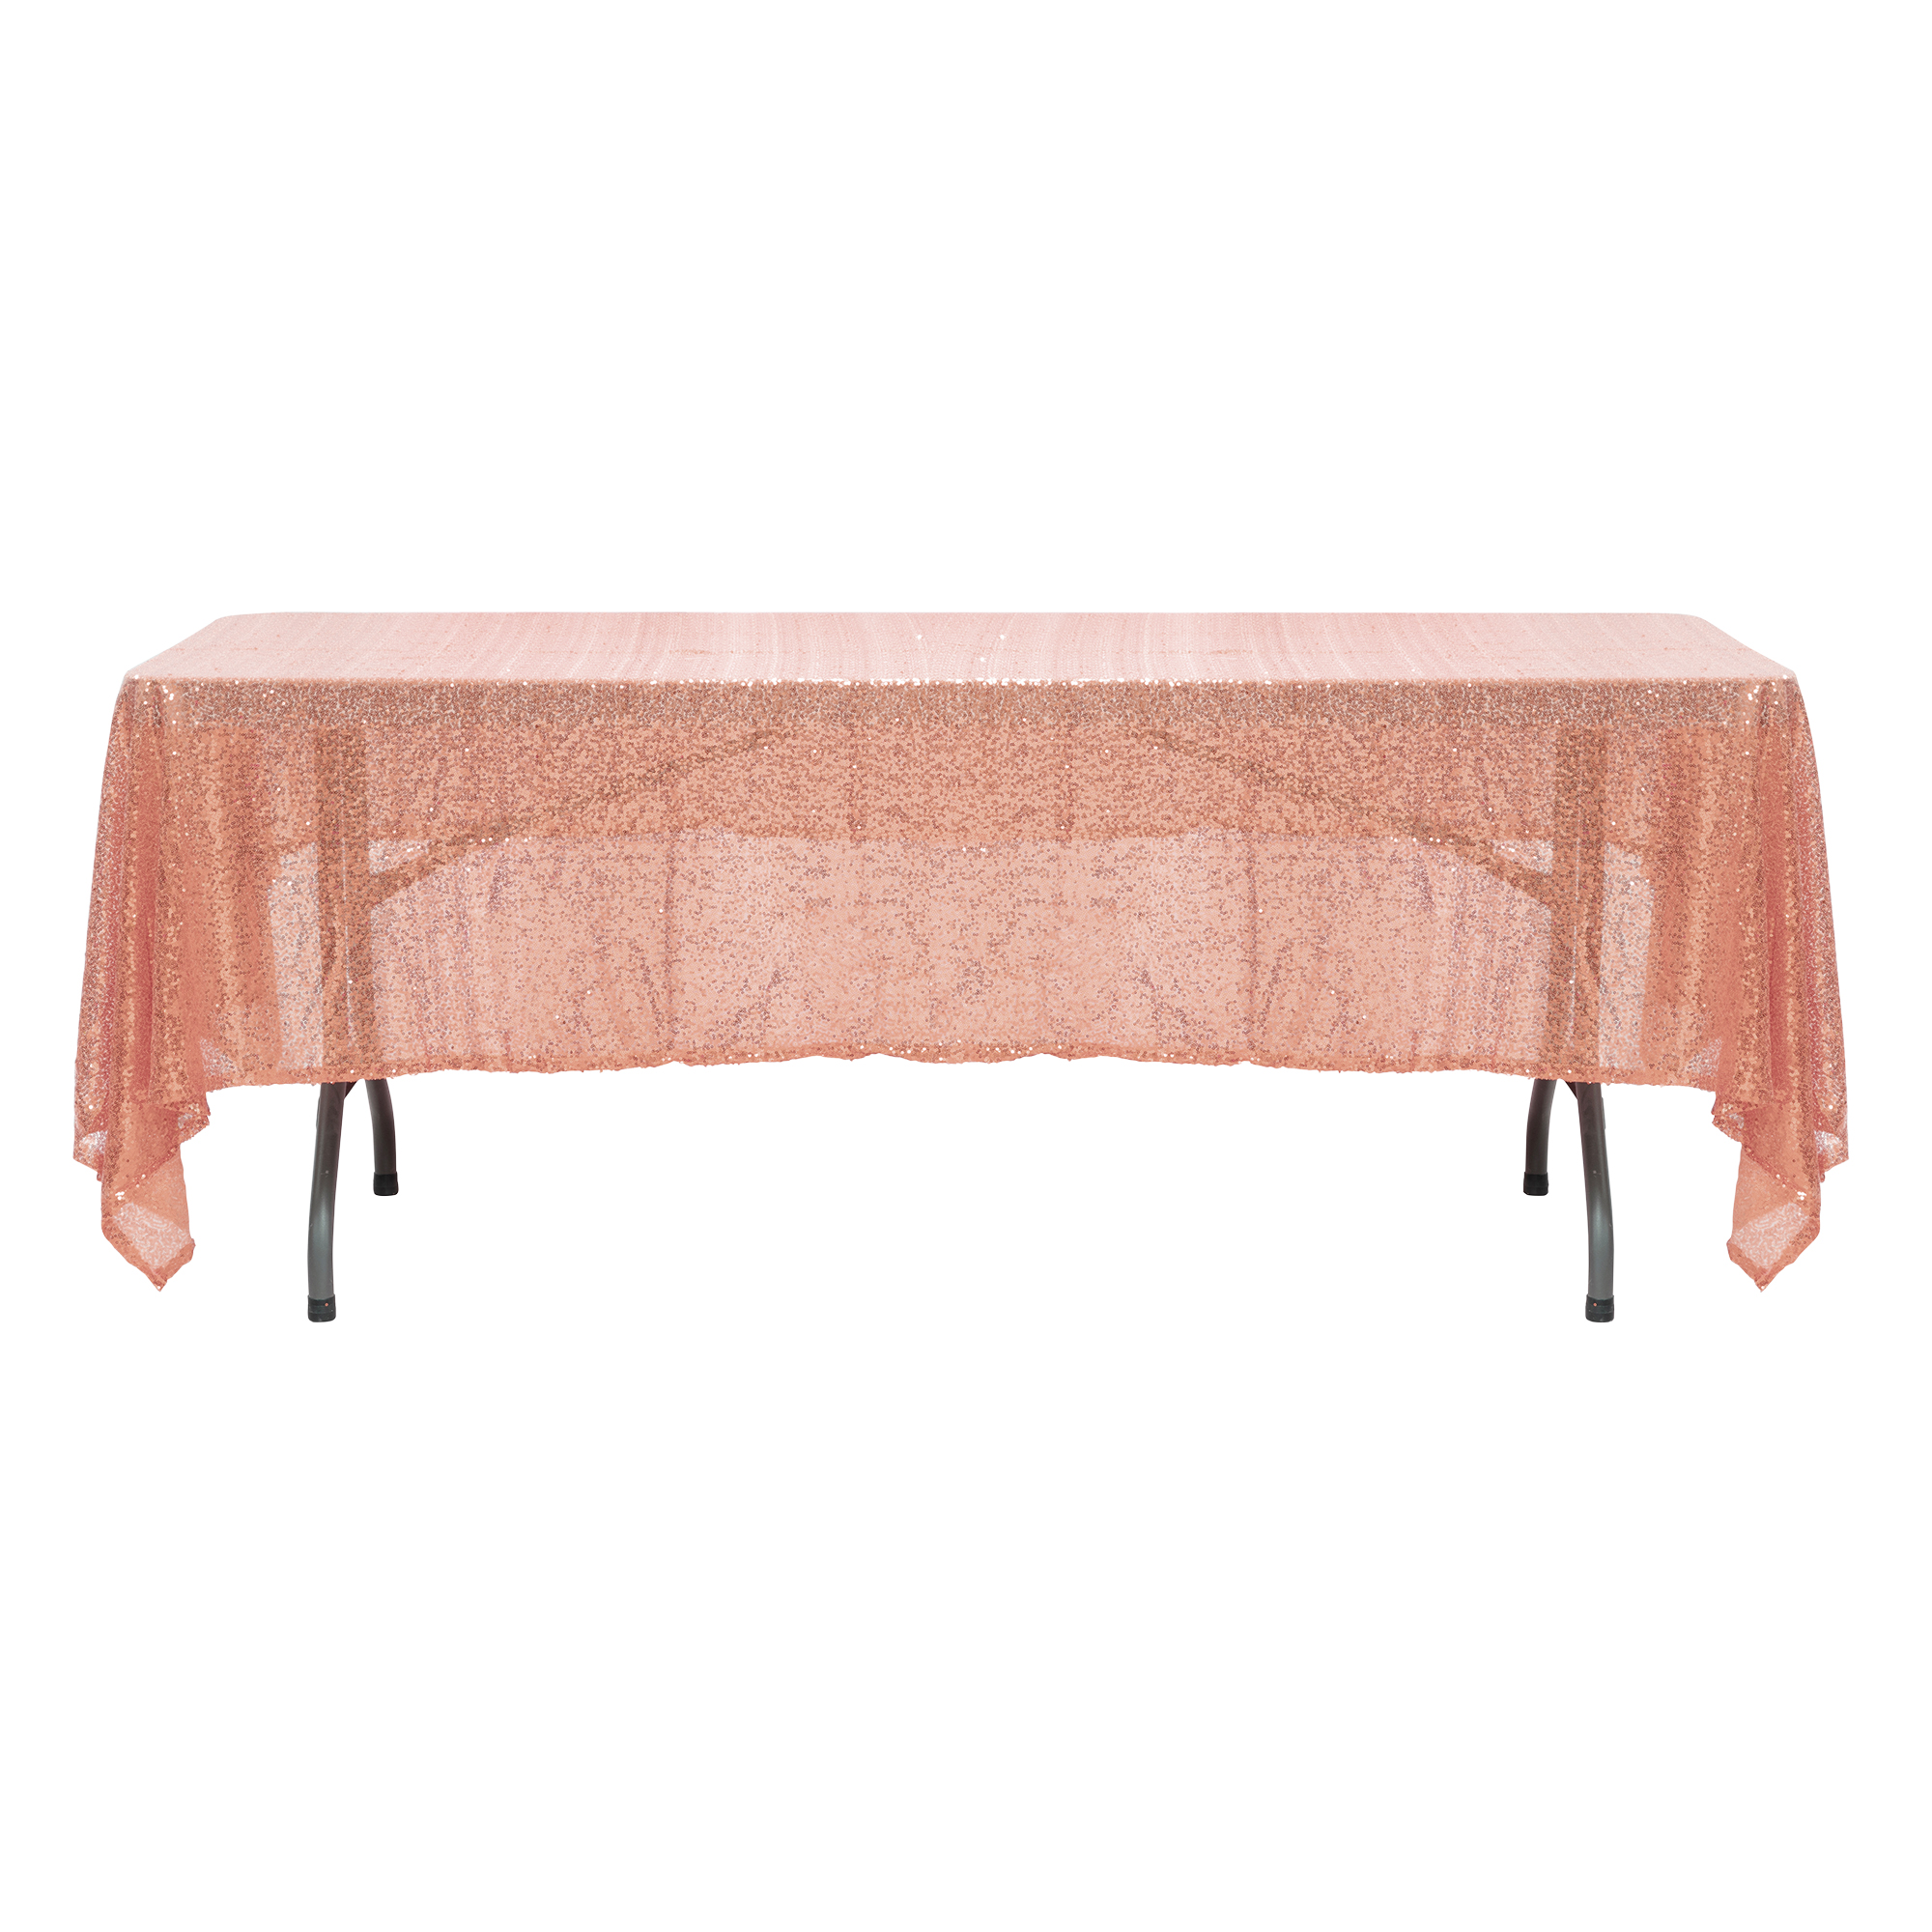 Rectangle Sequin Table Cover 60" x 102" - Blush